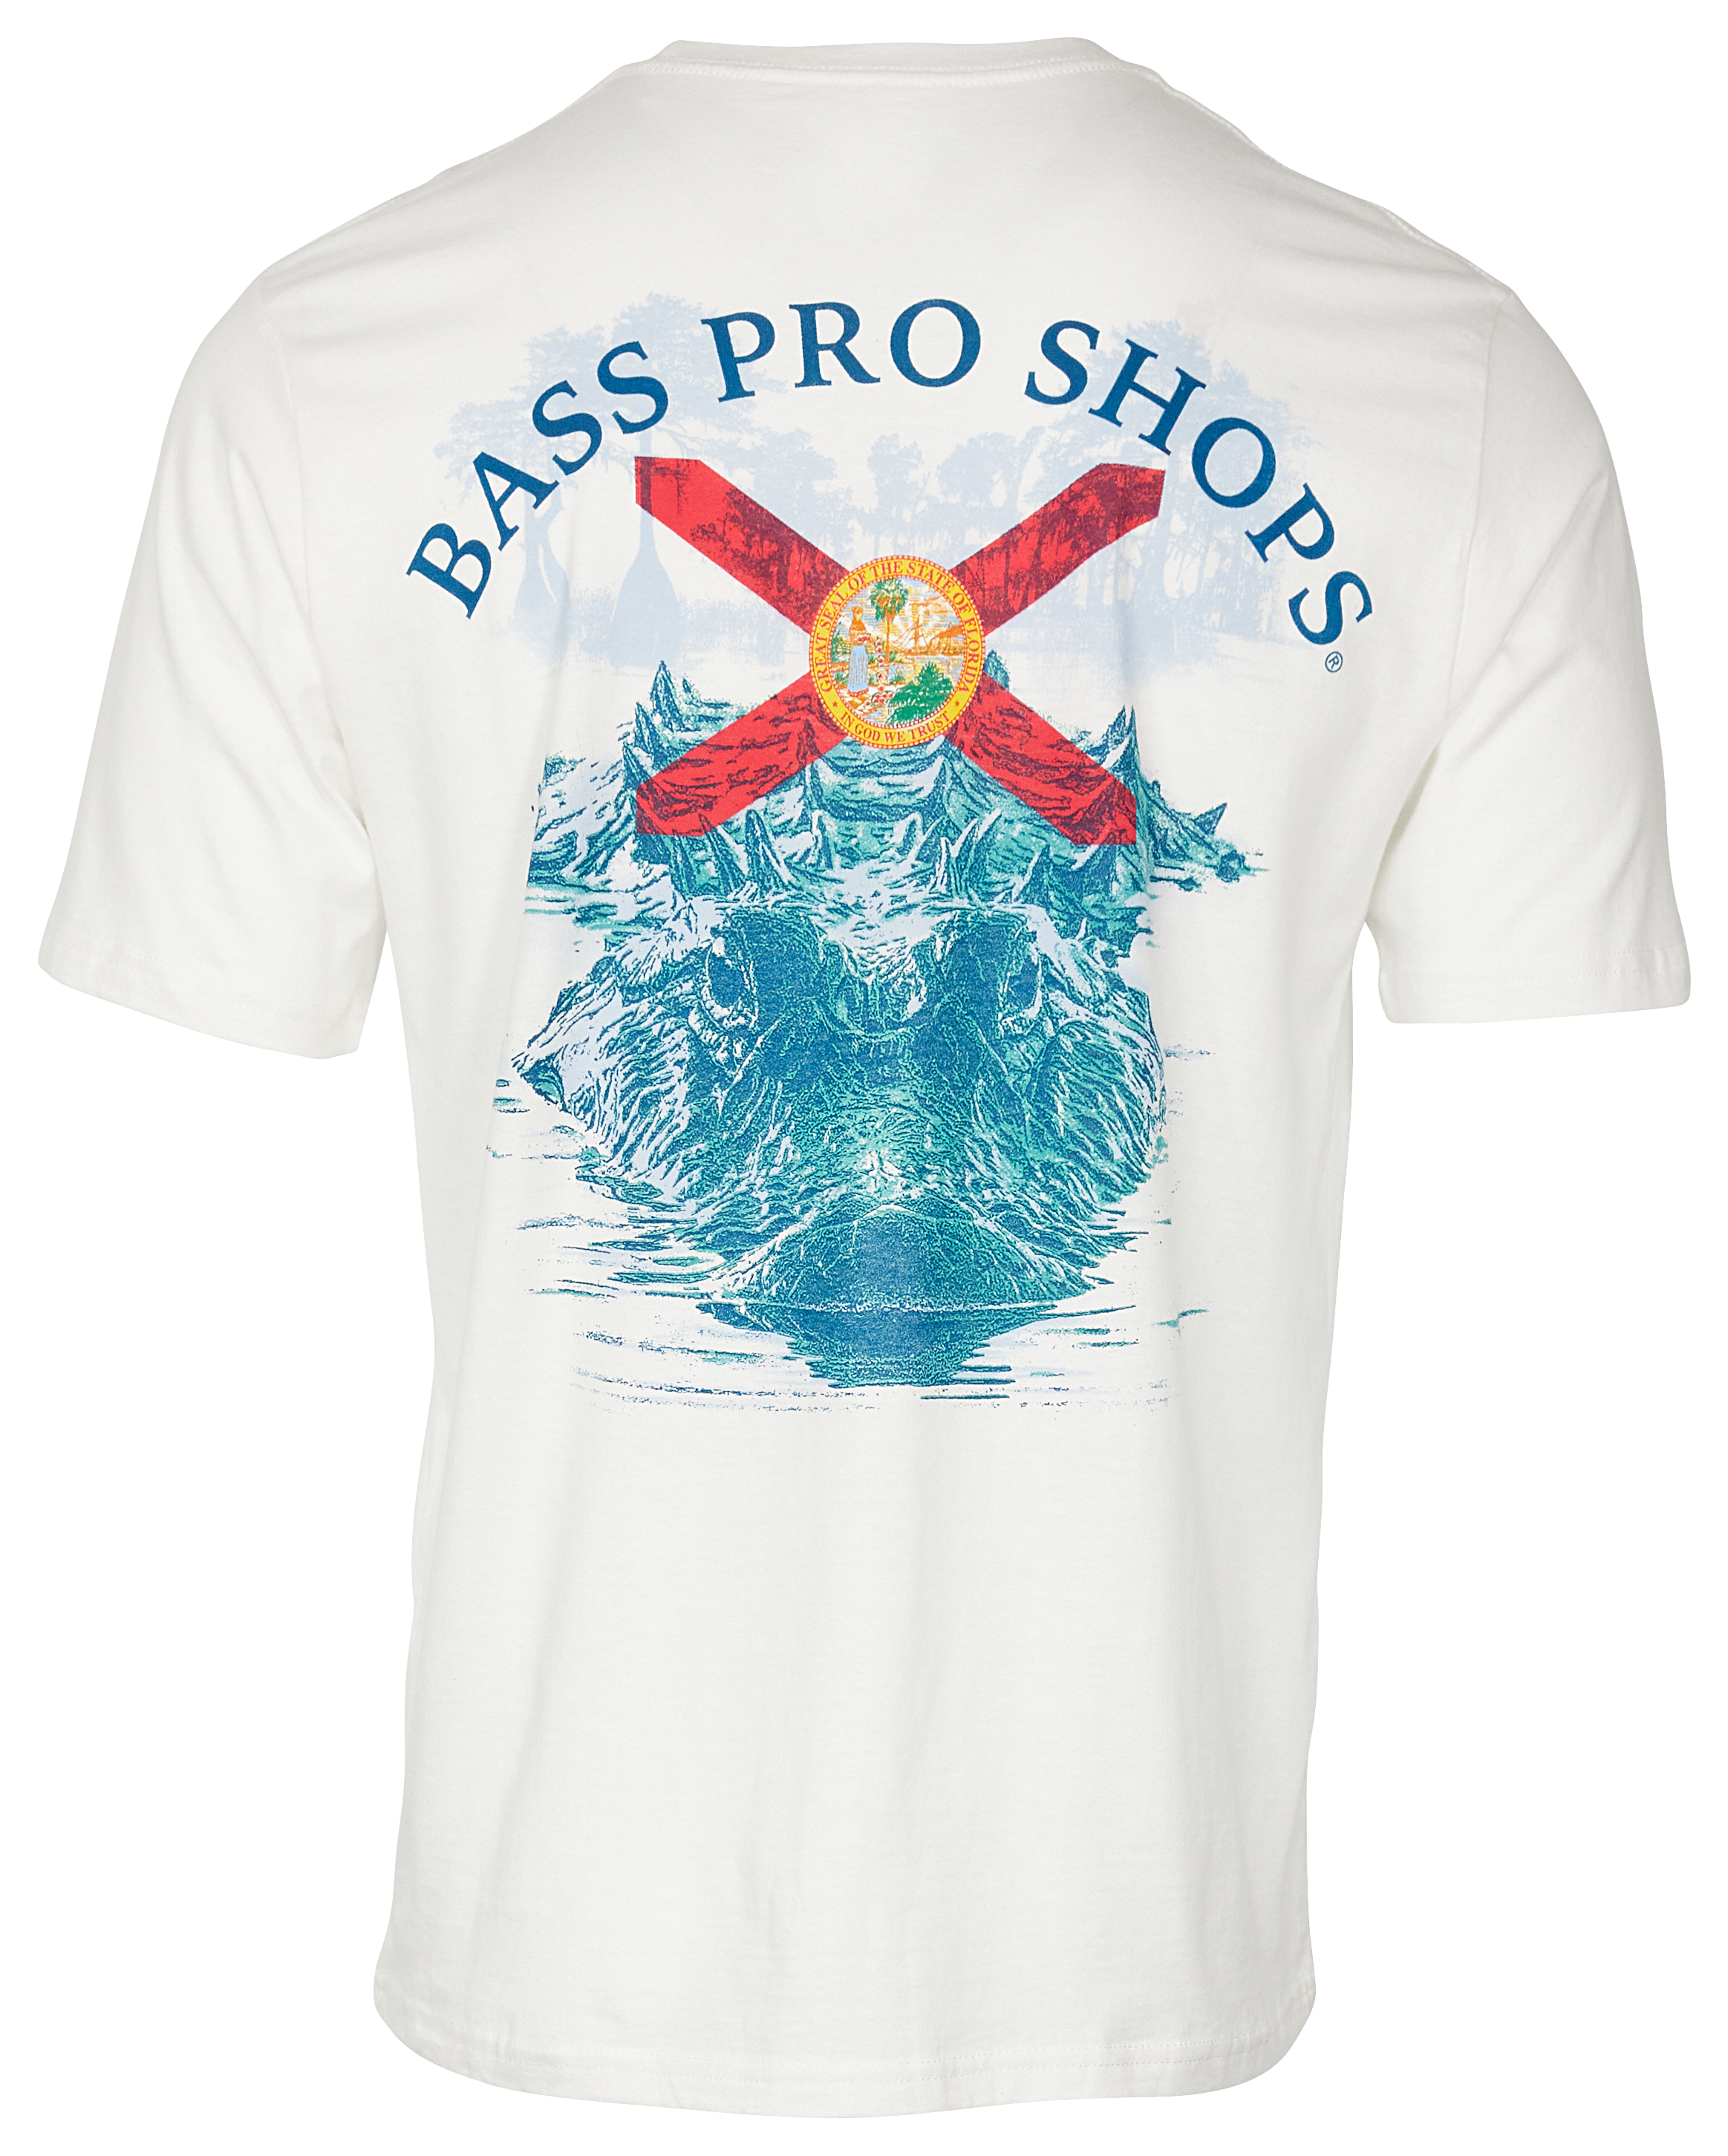 Bass Pro Shops Florida Shallow Waters Graphic Short-Sleeve T-Shirt for Men